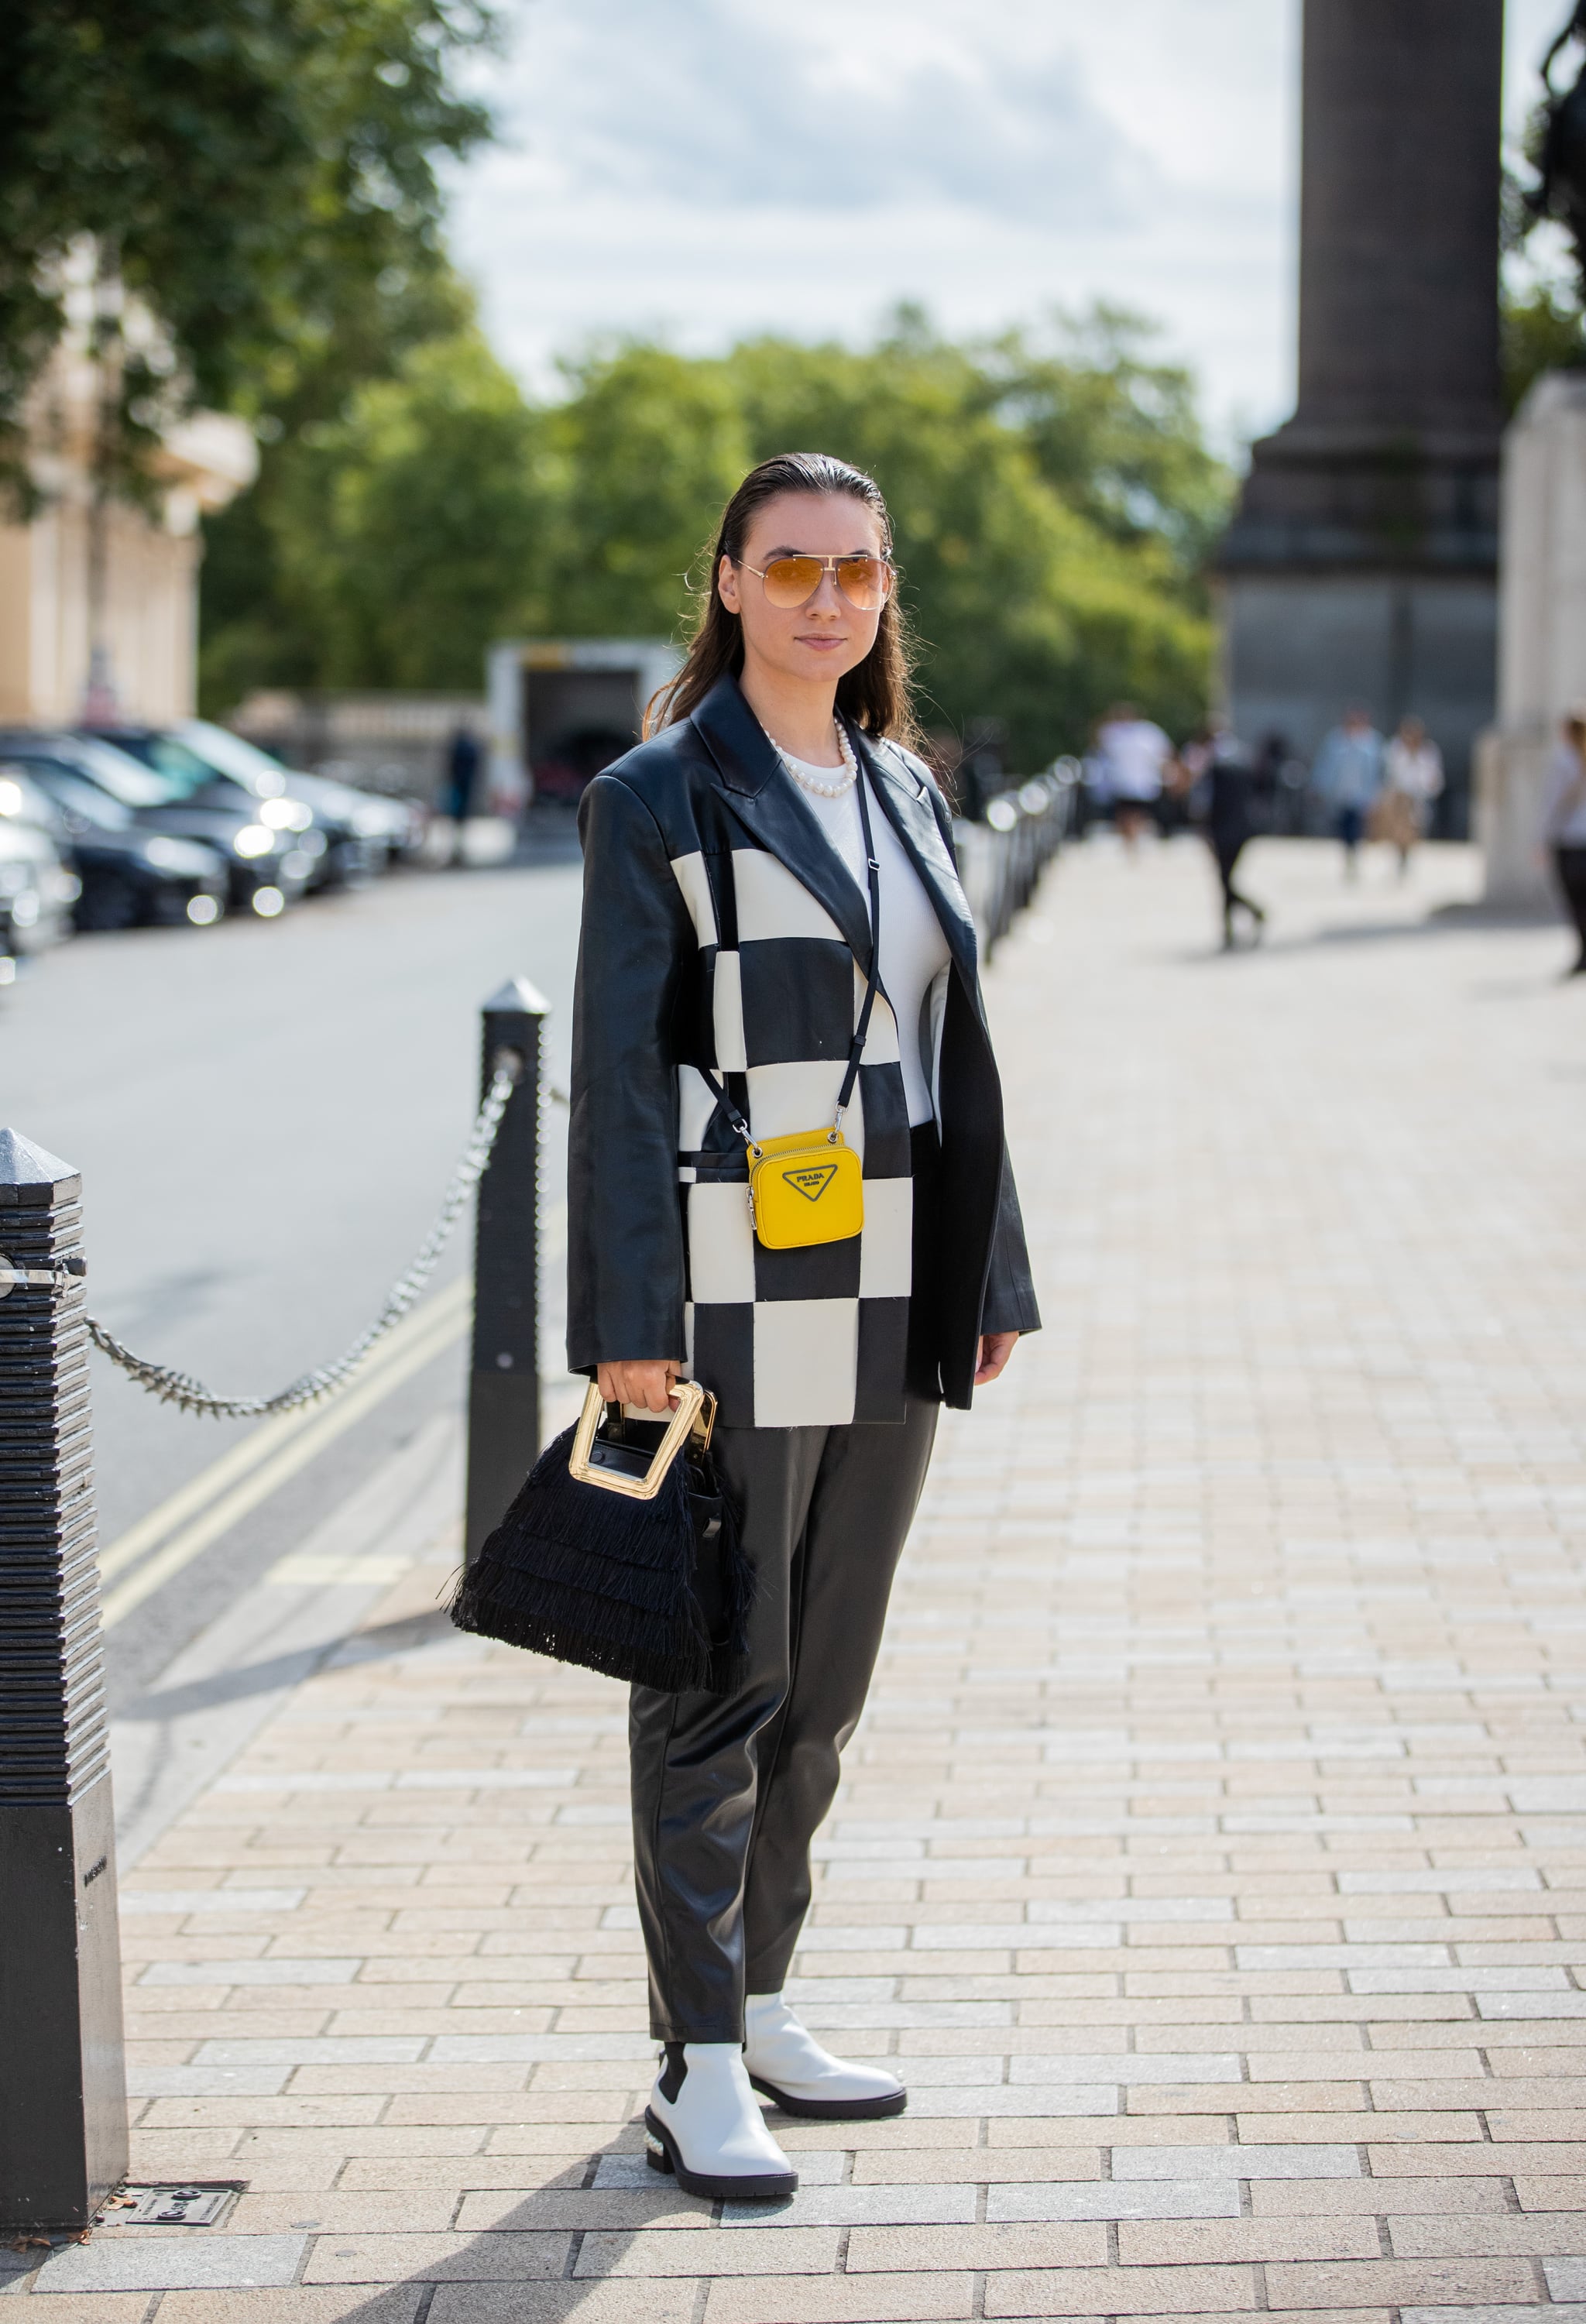 Shop 7 Statement Print Outfits From London Fashion Week Street